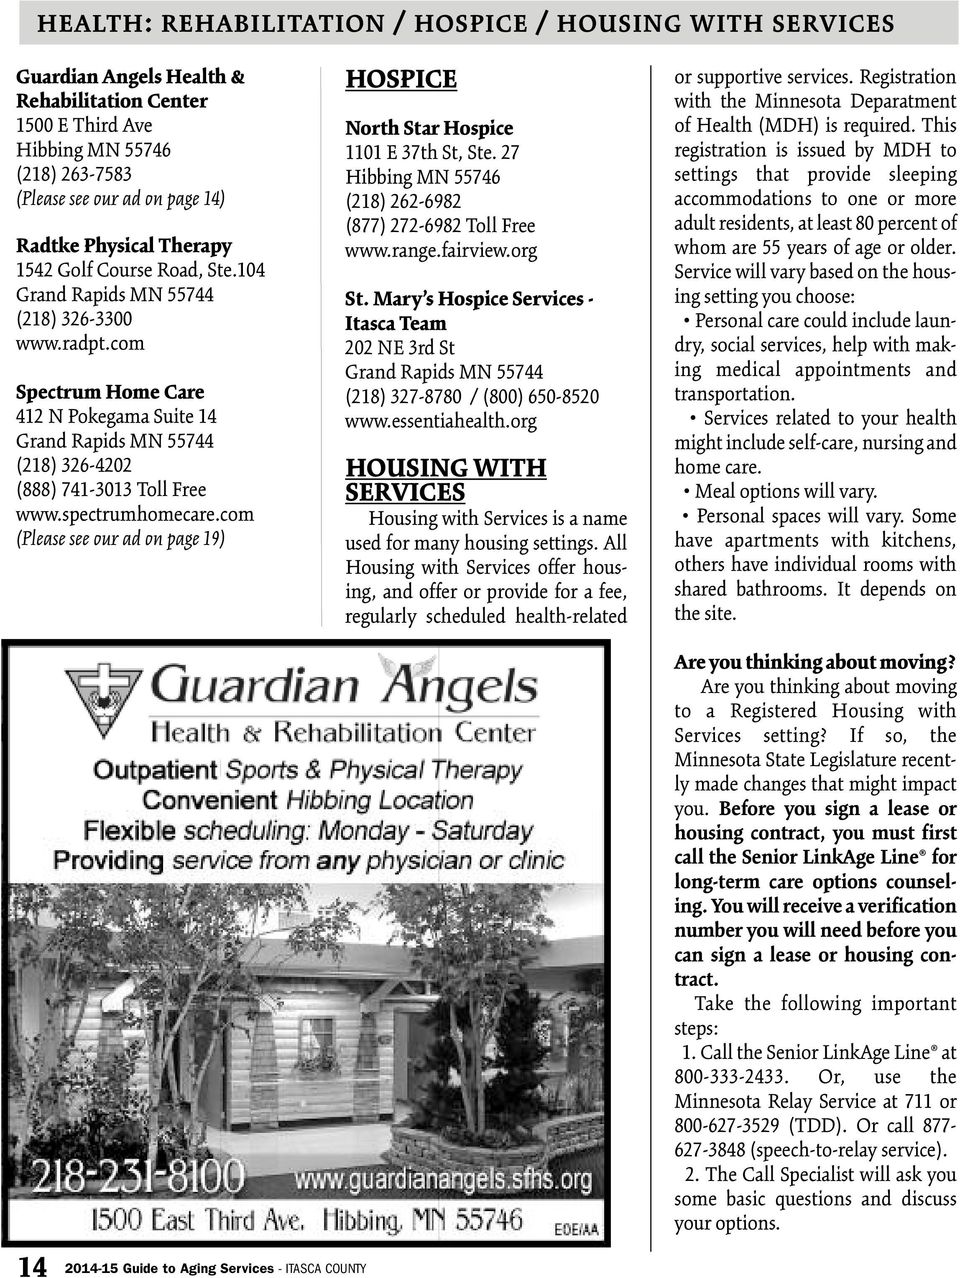 com (Please see our ad on page 19) HOSPICE North Star Hospice 1101 E 37th St, Ste. 27 Hibbing MN 55746 (218) 262-6982 (877) 272-6982 Toll Free www.range.fairview.org St.